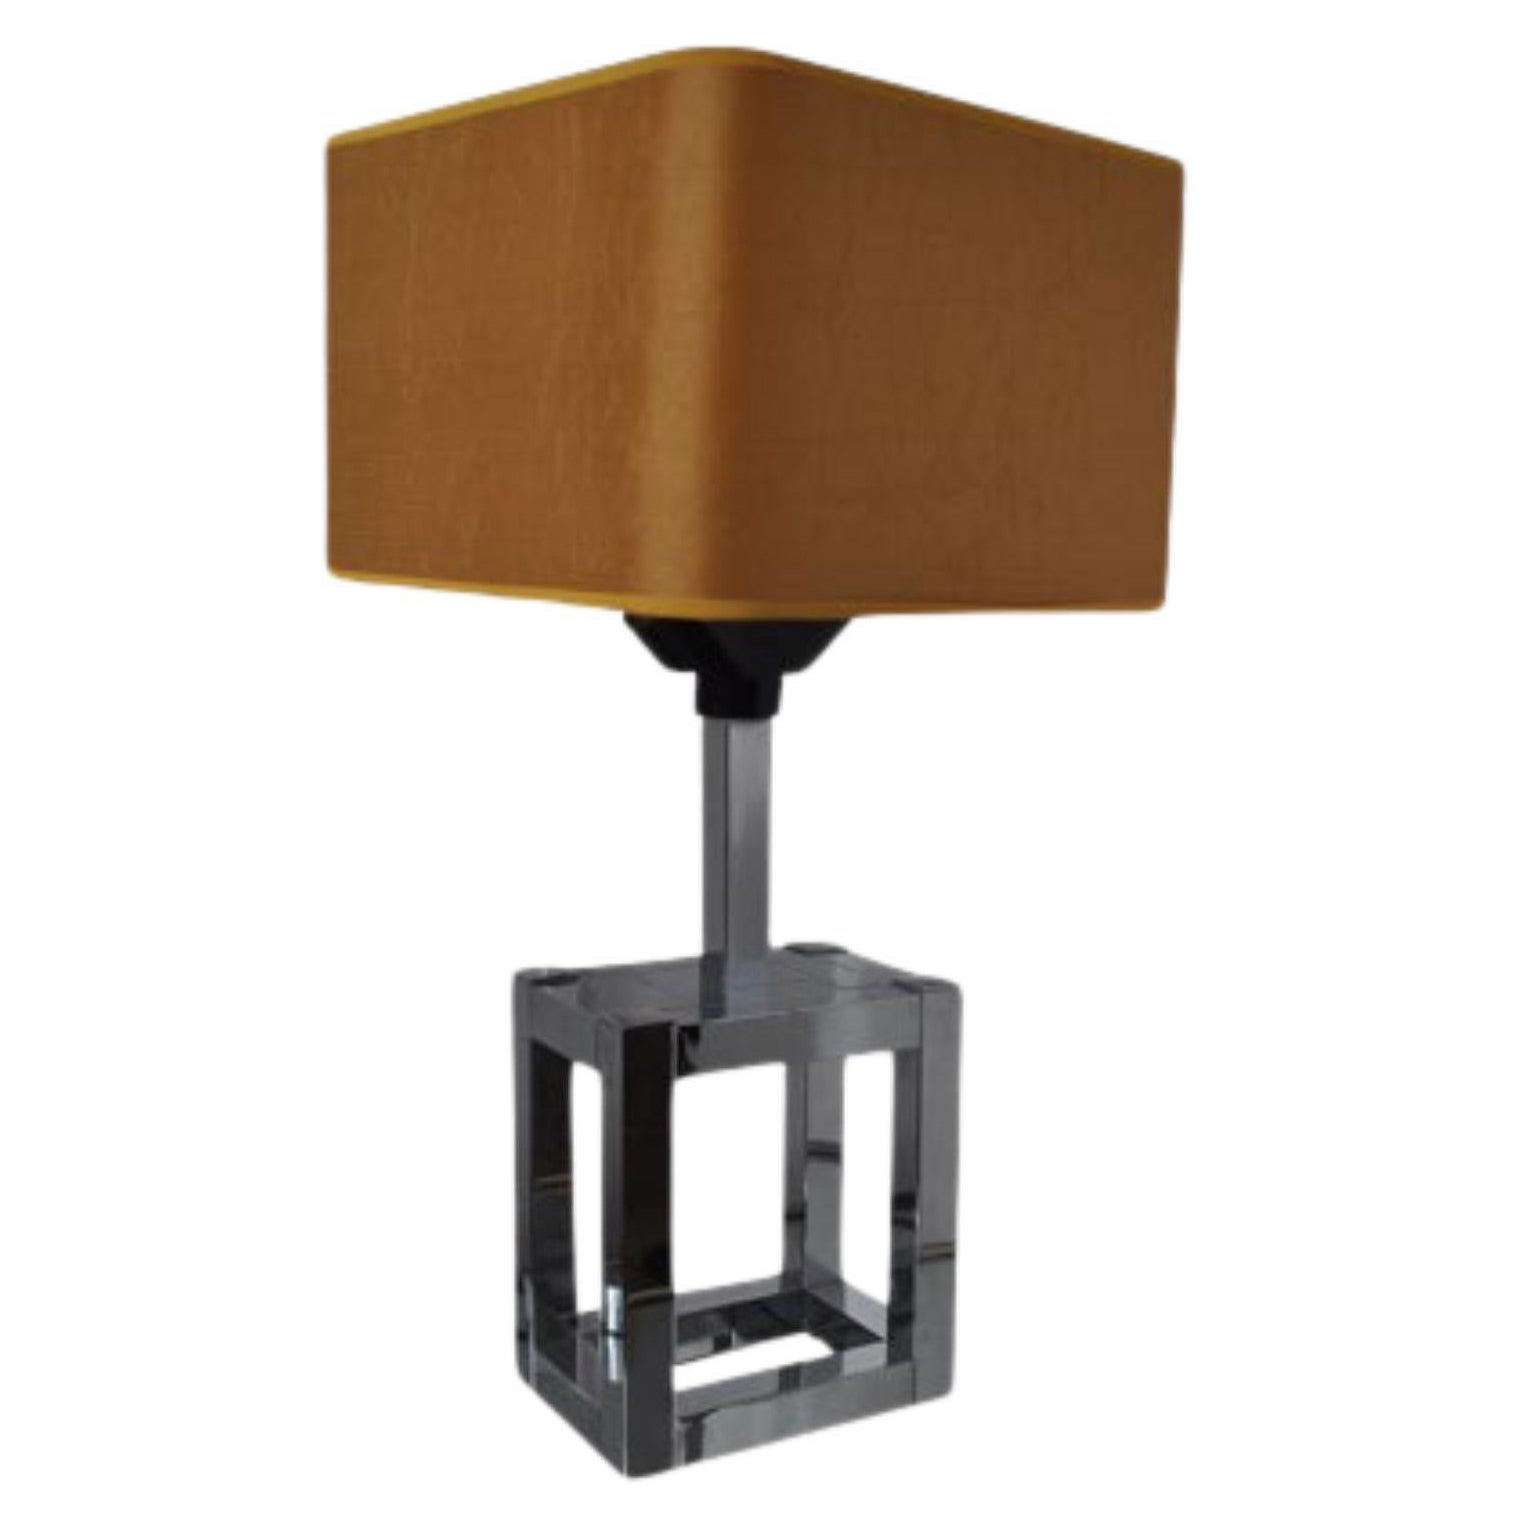 1970 Willy Rizzo Cubic Table Lamp for Lumica, Italy